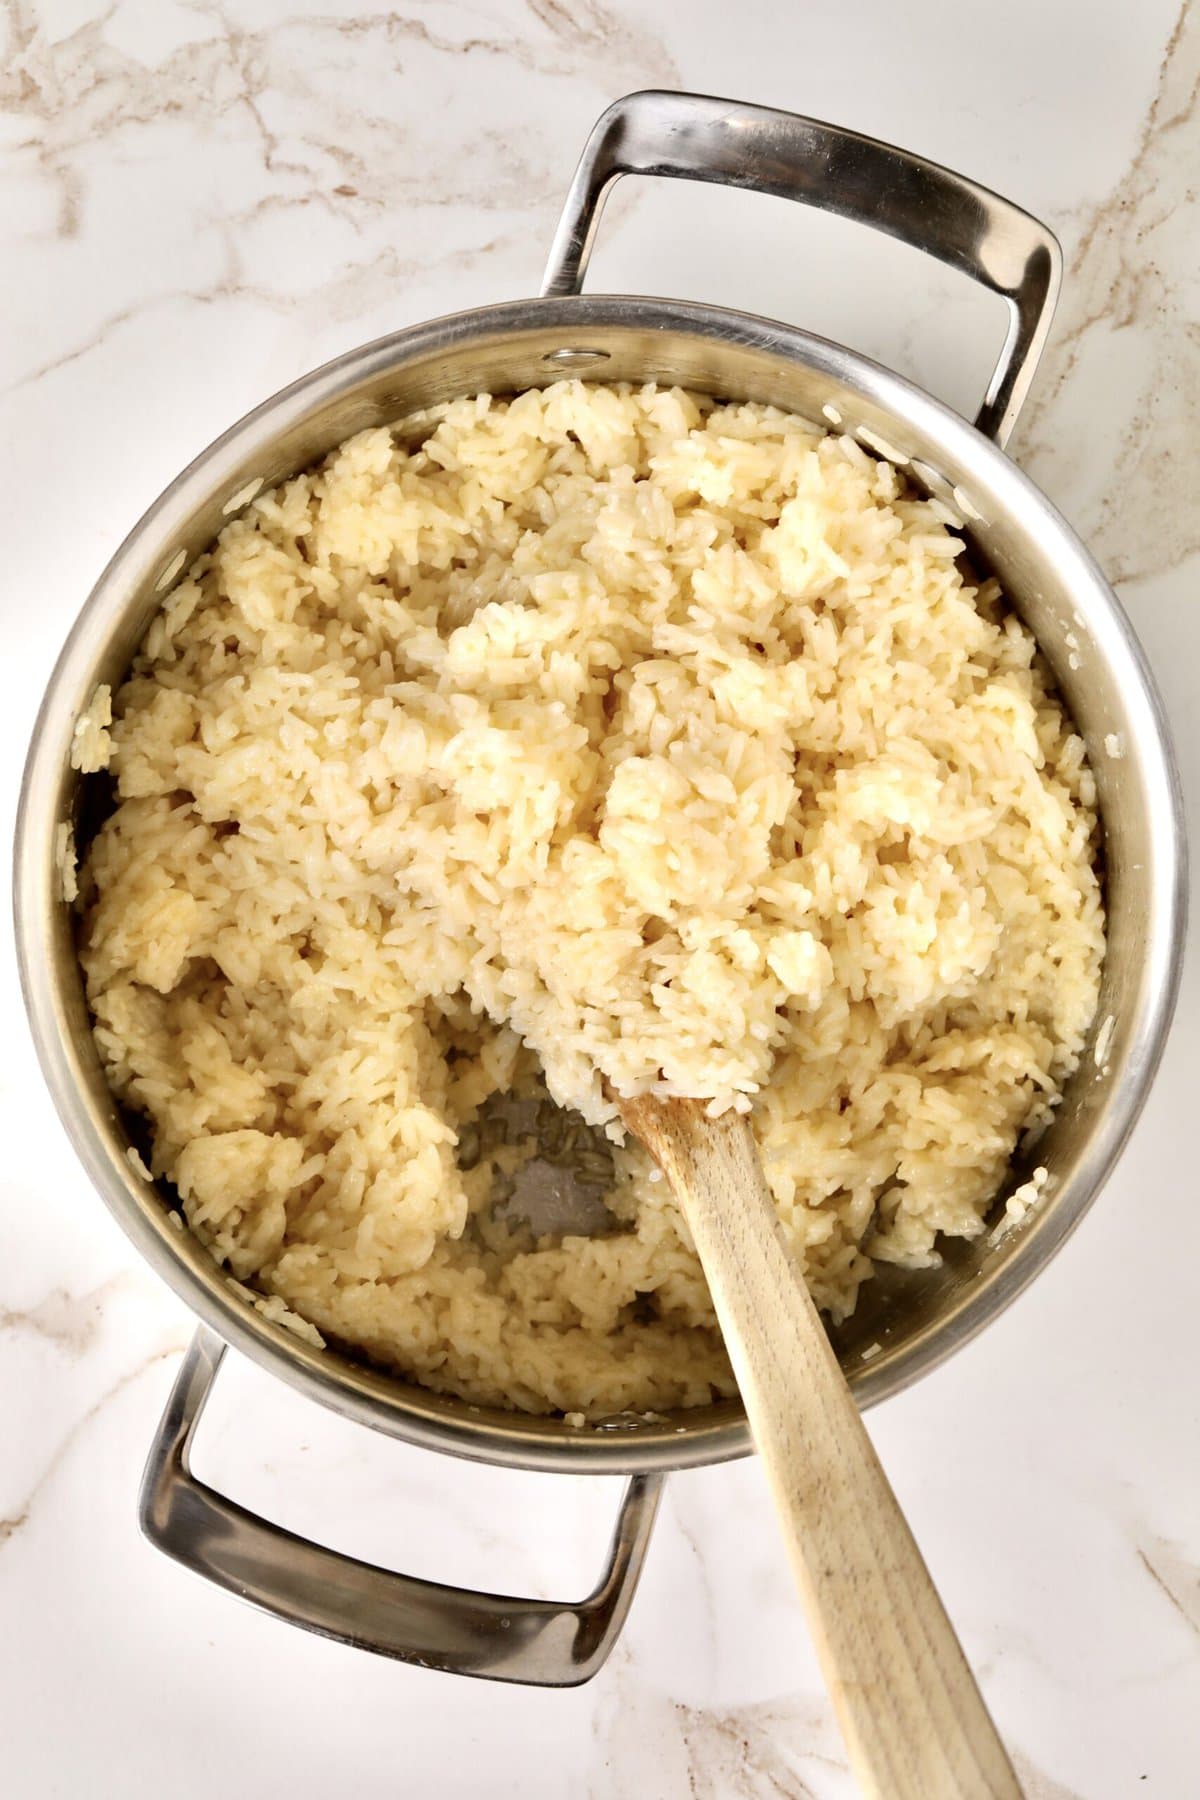 How to make Creamy Parmesan Rice Recipe (Quick and Easy Side): stirring in the butter and cheese to the cooked rice. Fluffing and mixing rice.